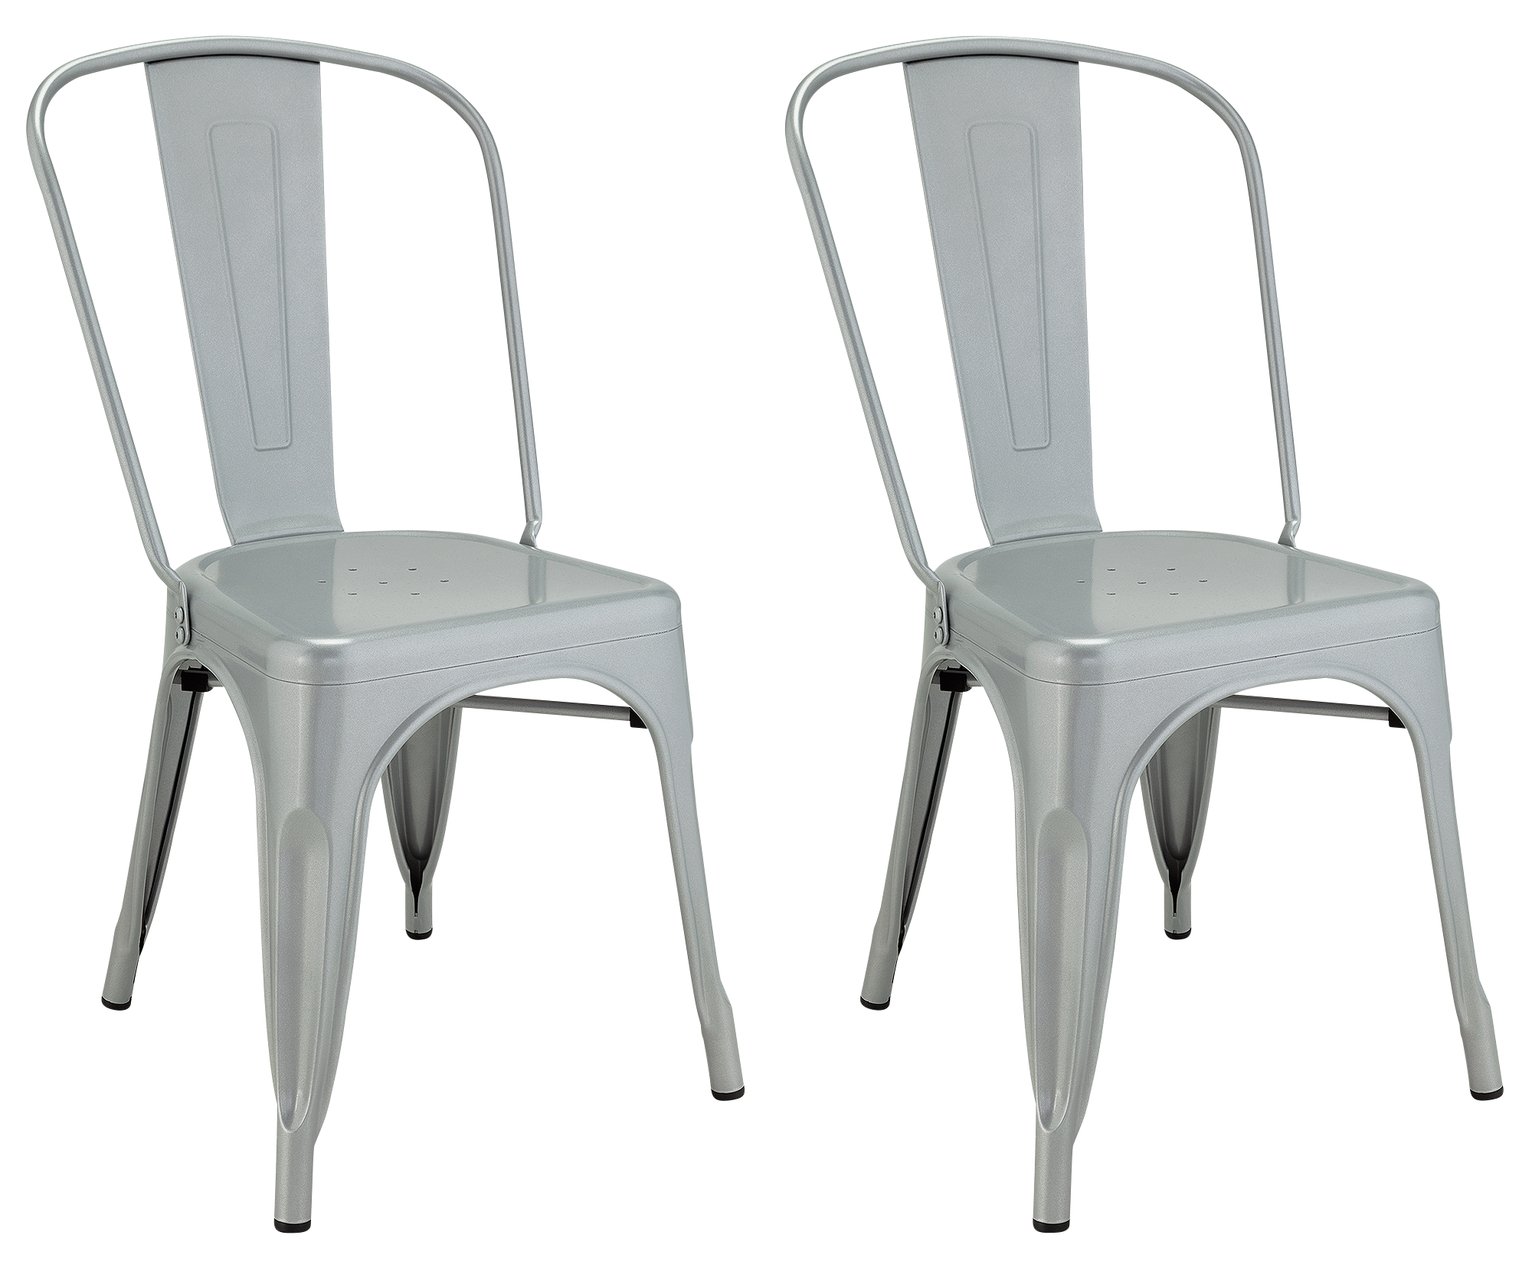 Argos Home Industrial Pair of Metal Dining Chairs - Silver